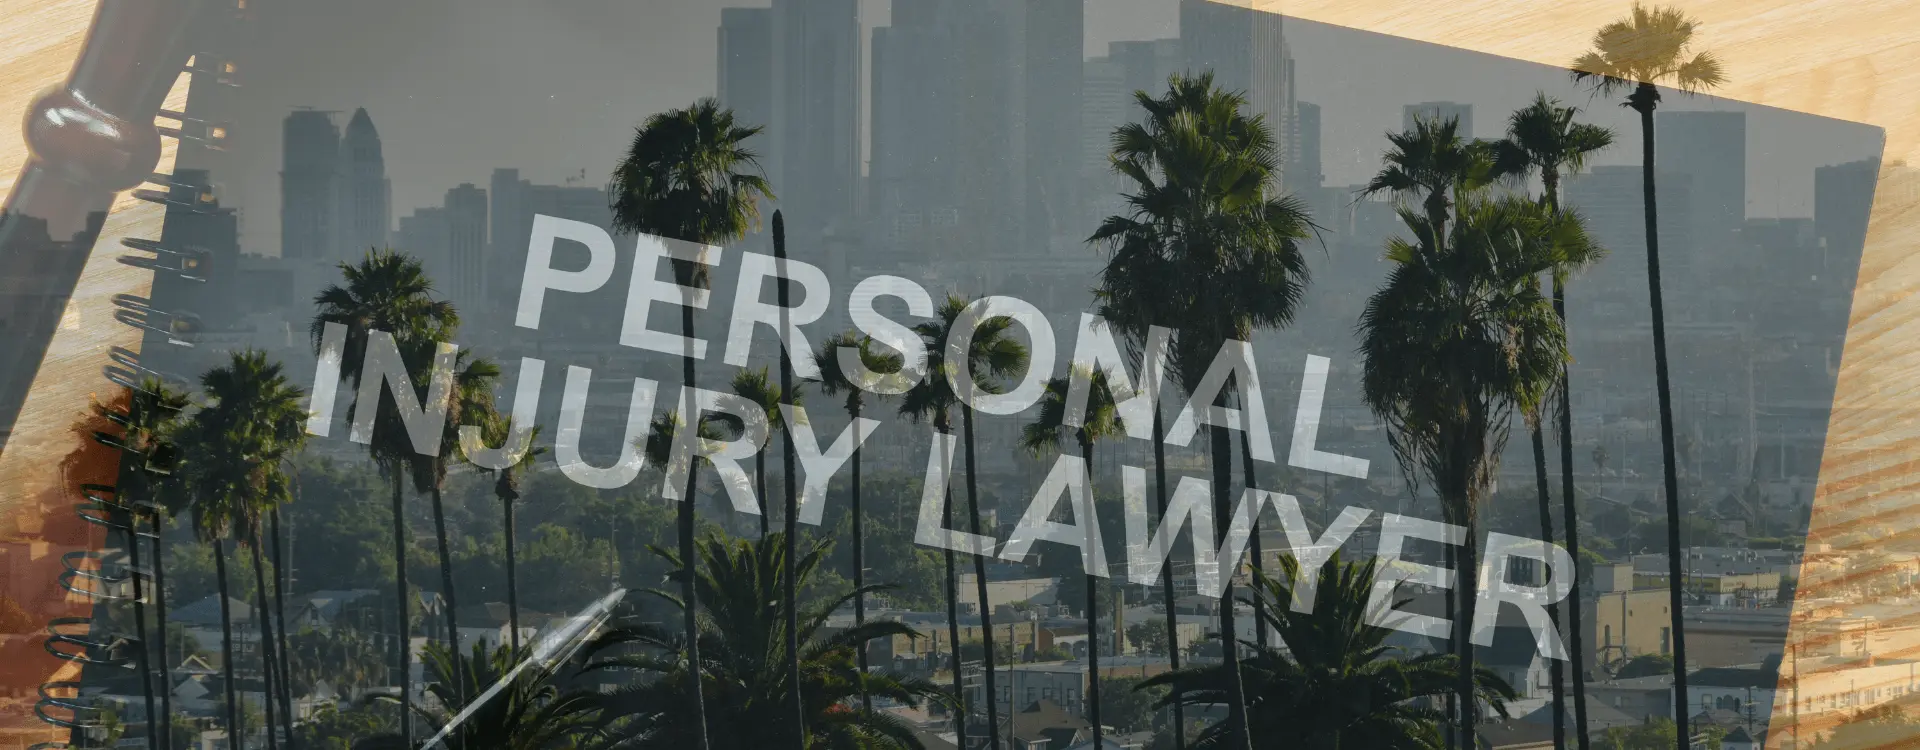 local personal injury lawyer in california